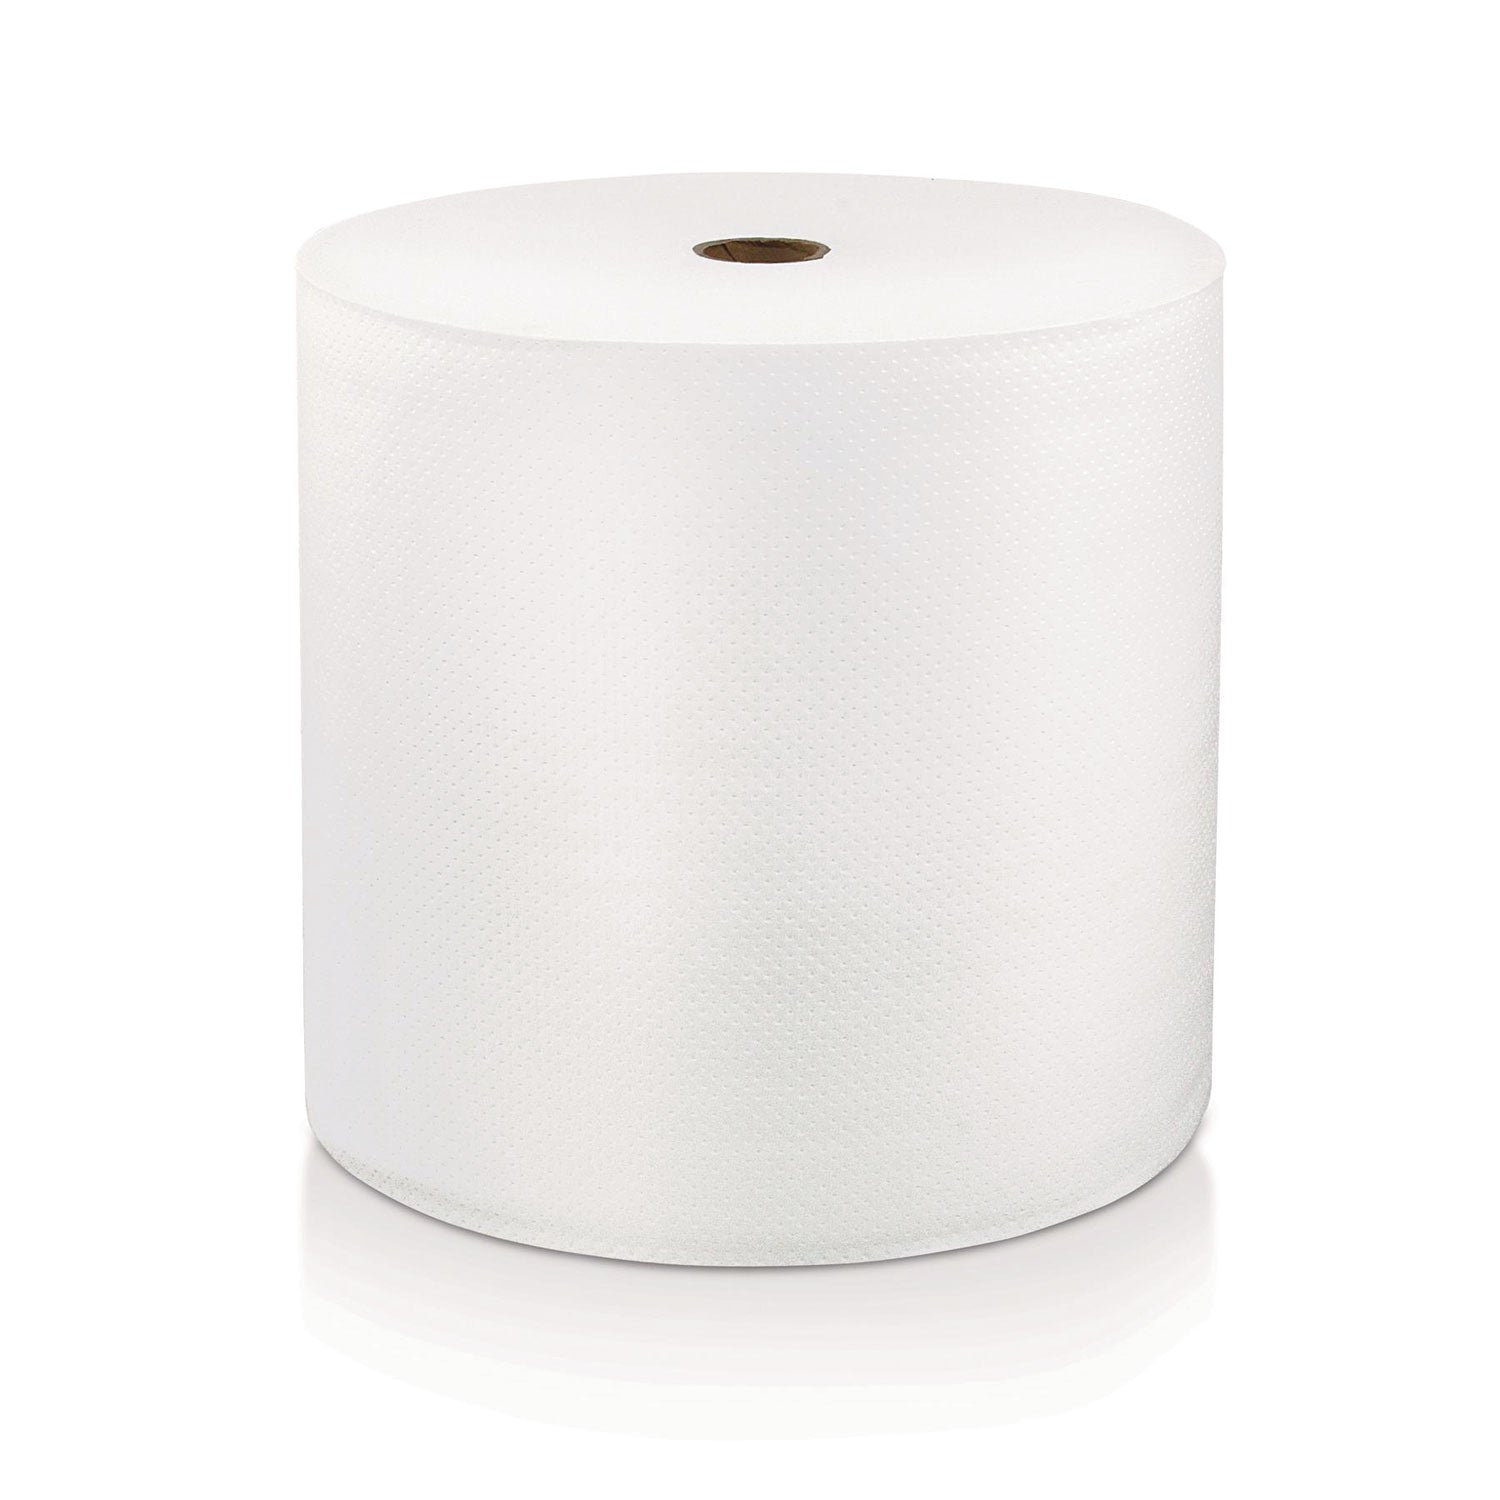 LoCor Hardwound Roll Towels - 1 Ply - 8" x 800 ft - White - Virgin Fiber - Hygienic, Embossed, Strong, Absorbent - For Washroom - 6 / Carton - 1